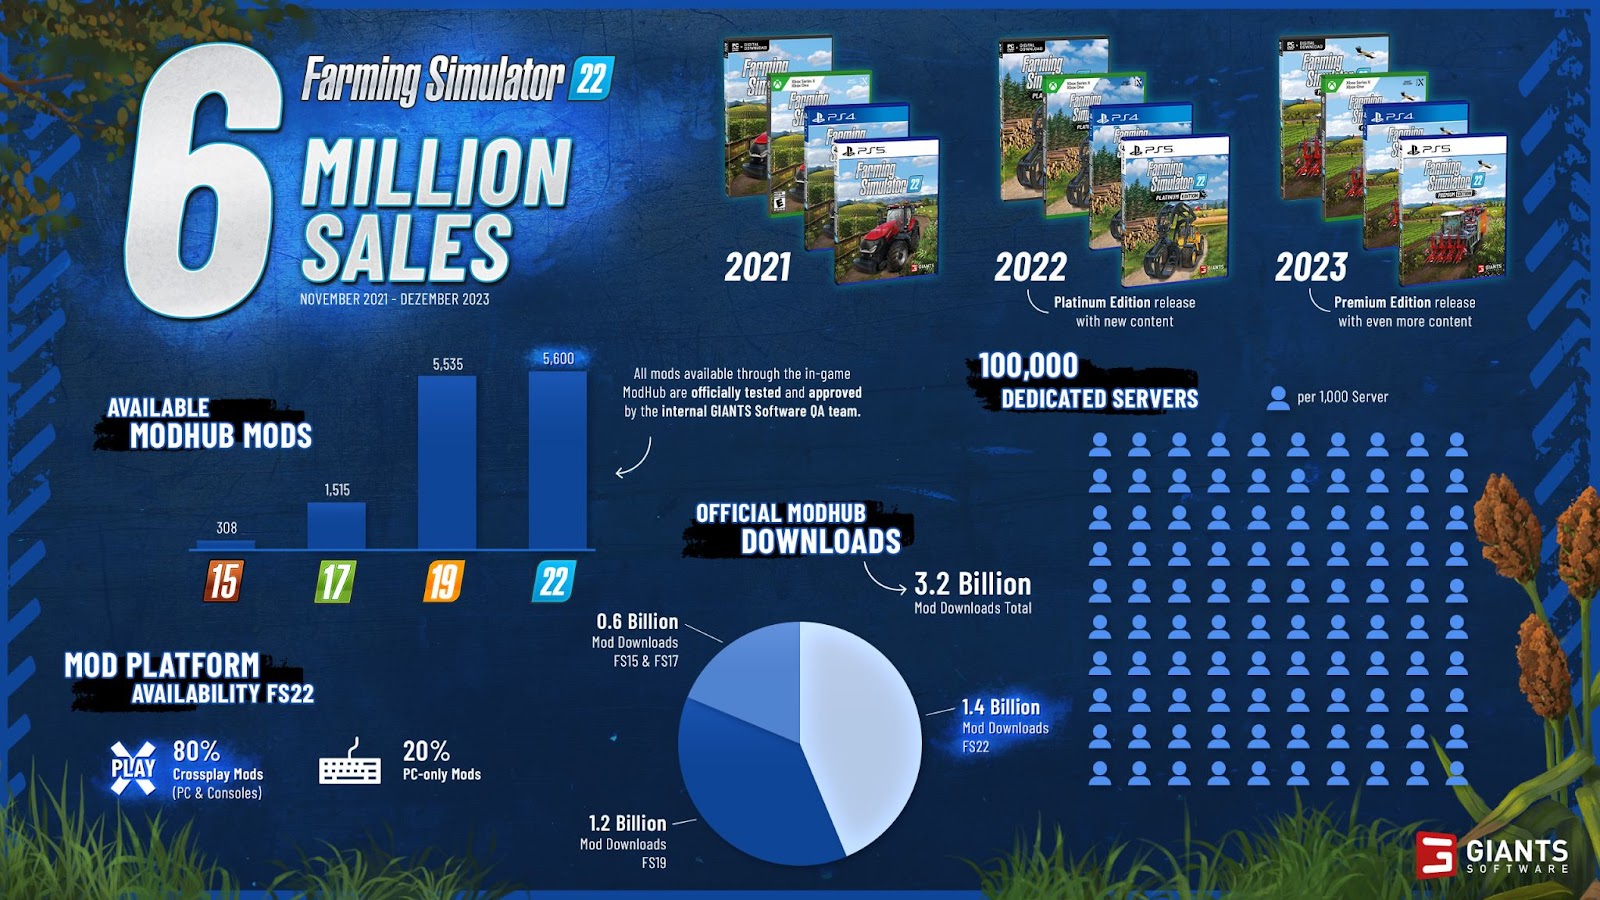 Farming Simulator 22 Breaks Records: GIANTS Software Reports 6 Million  Copies Sold - Games Press